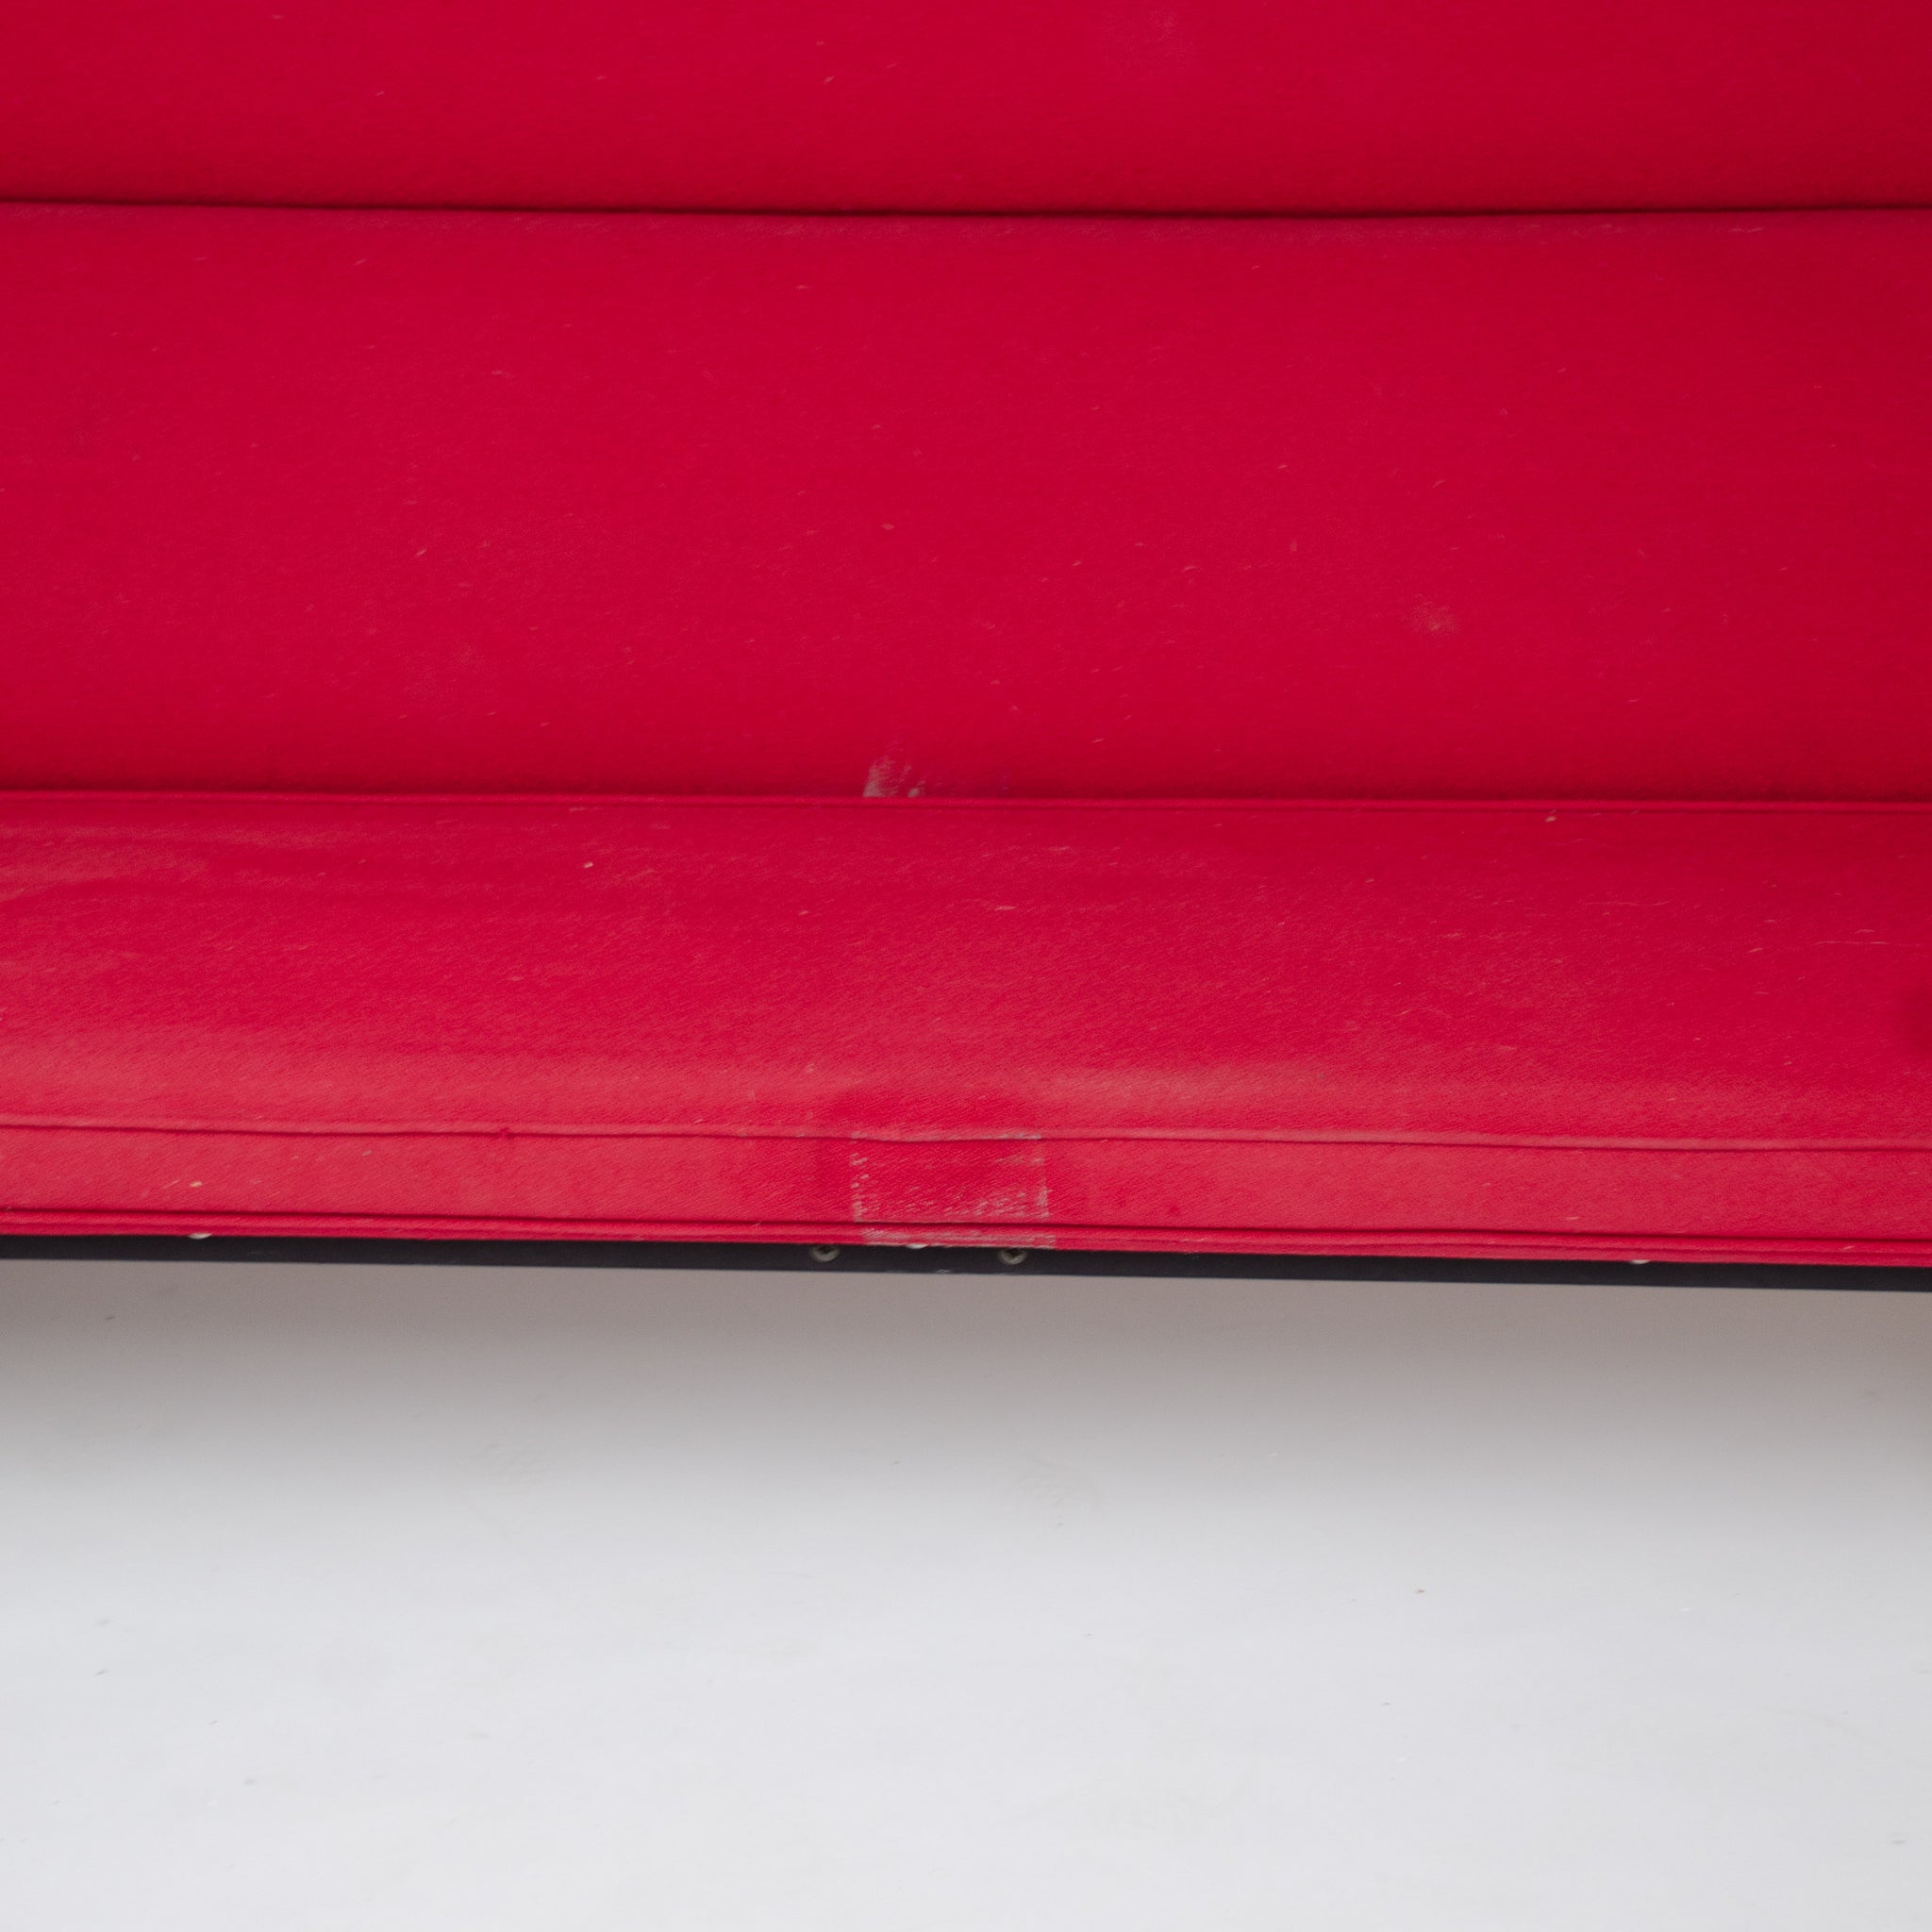 SOLD Early 2000's Eames Herman Miller Sofa Compact with Red Original Crepe Upholstery